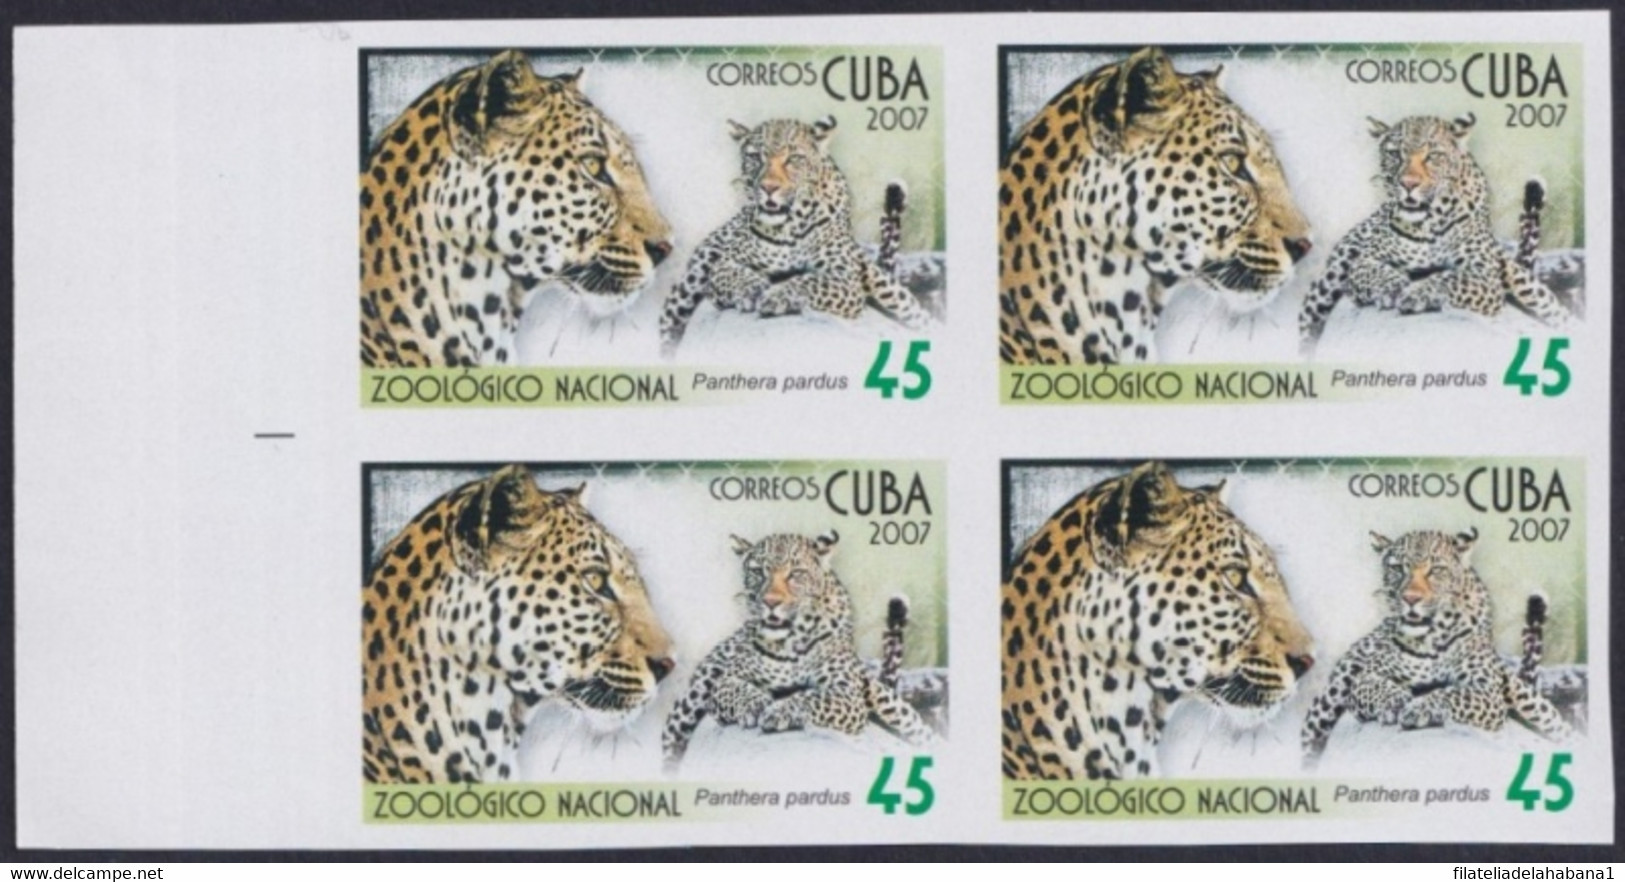 2007.708 CUBA 2007 45c MNH IMPERFORATED PROOF VIRGEN KEY FAUNA ZOO PANTHERA TIGER FELINE TIGRE. - Imperforates, Proofs & Errors